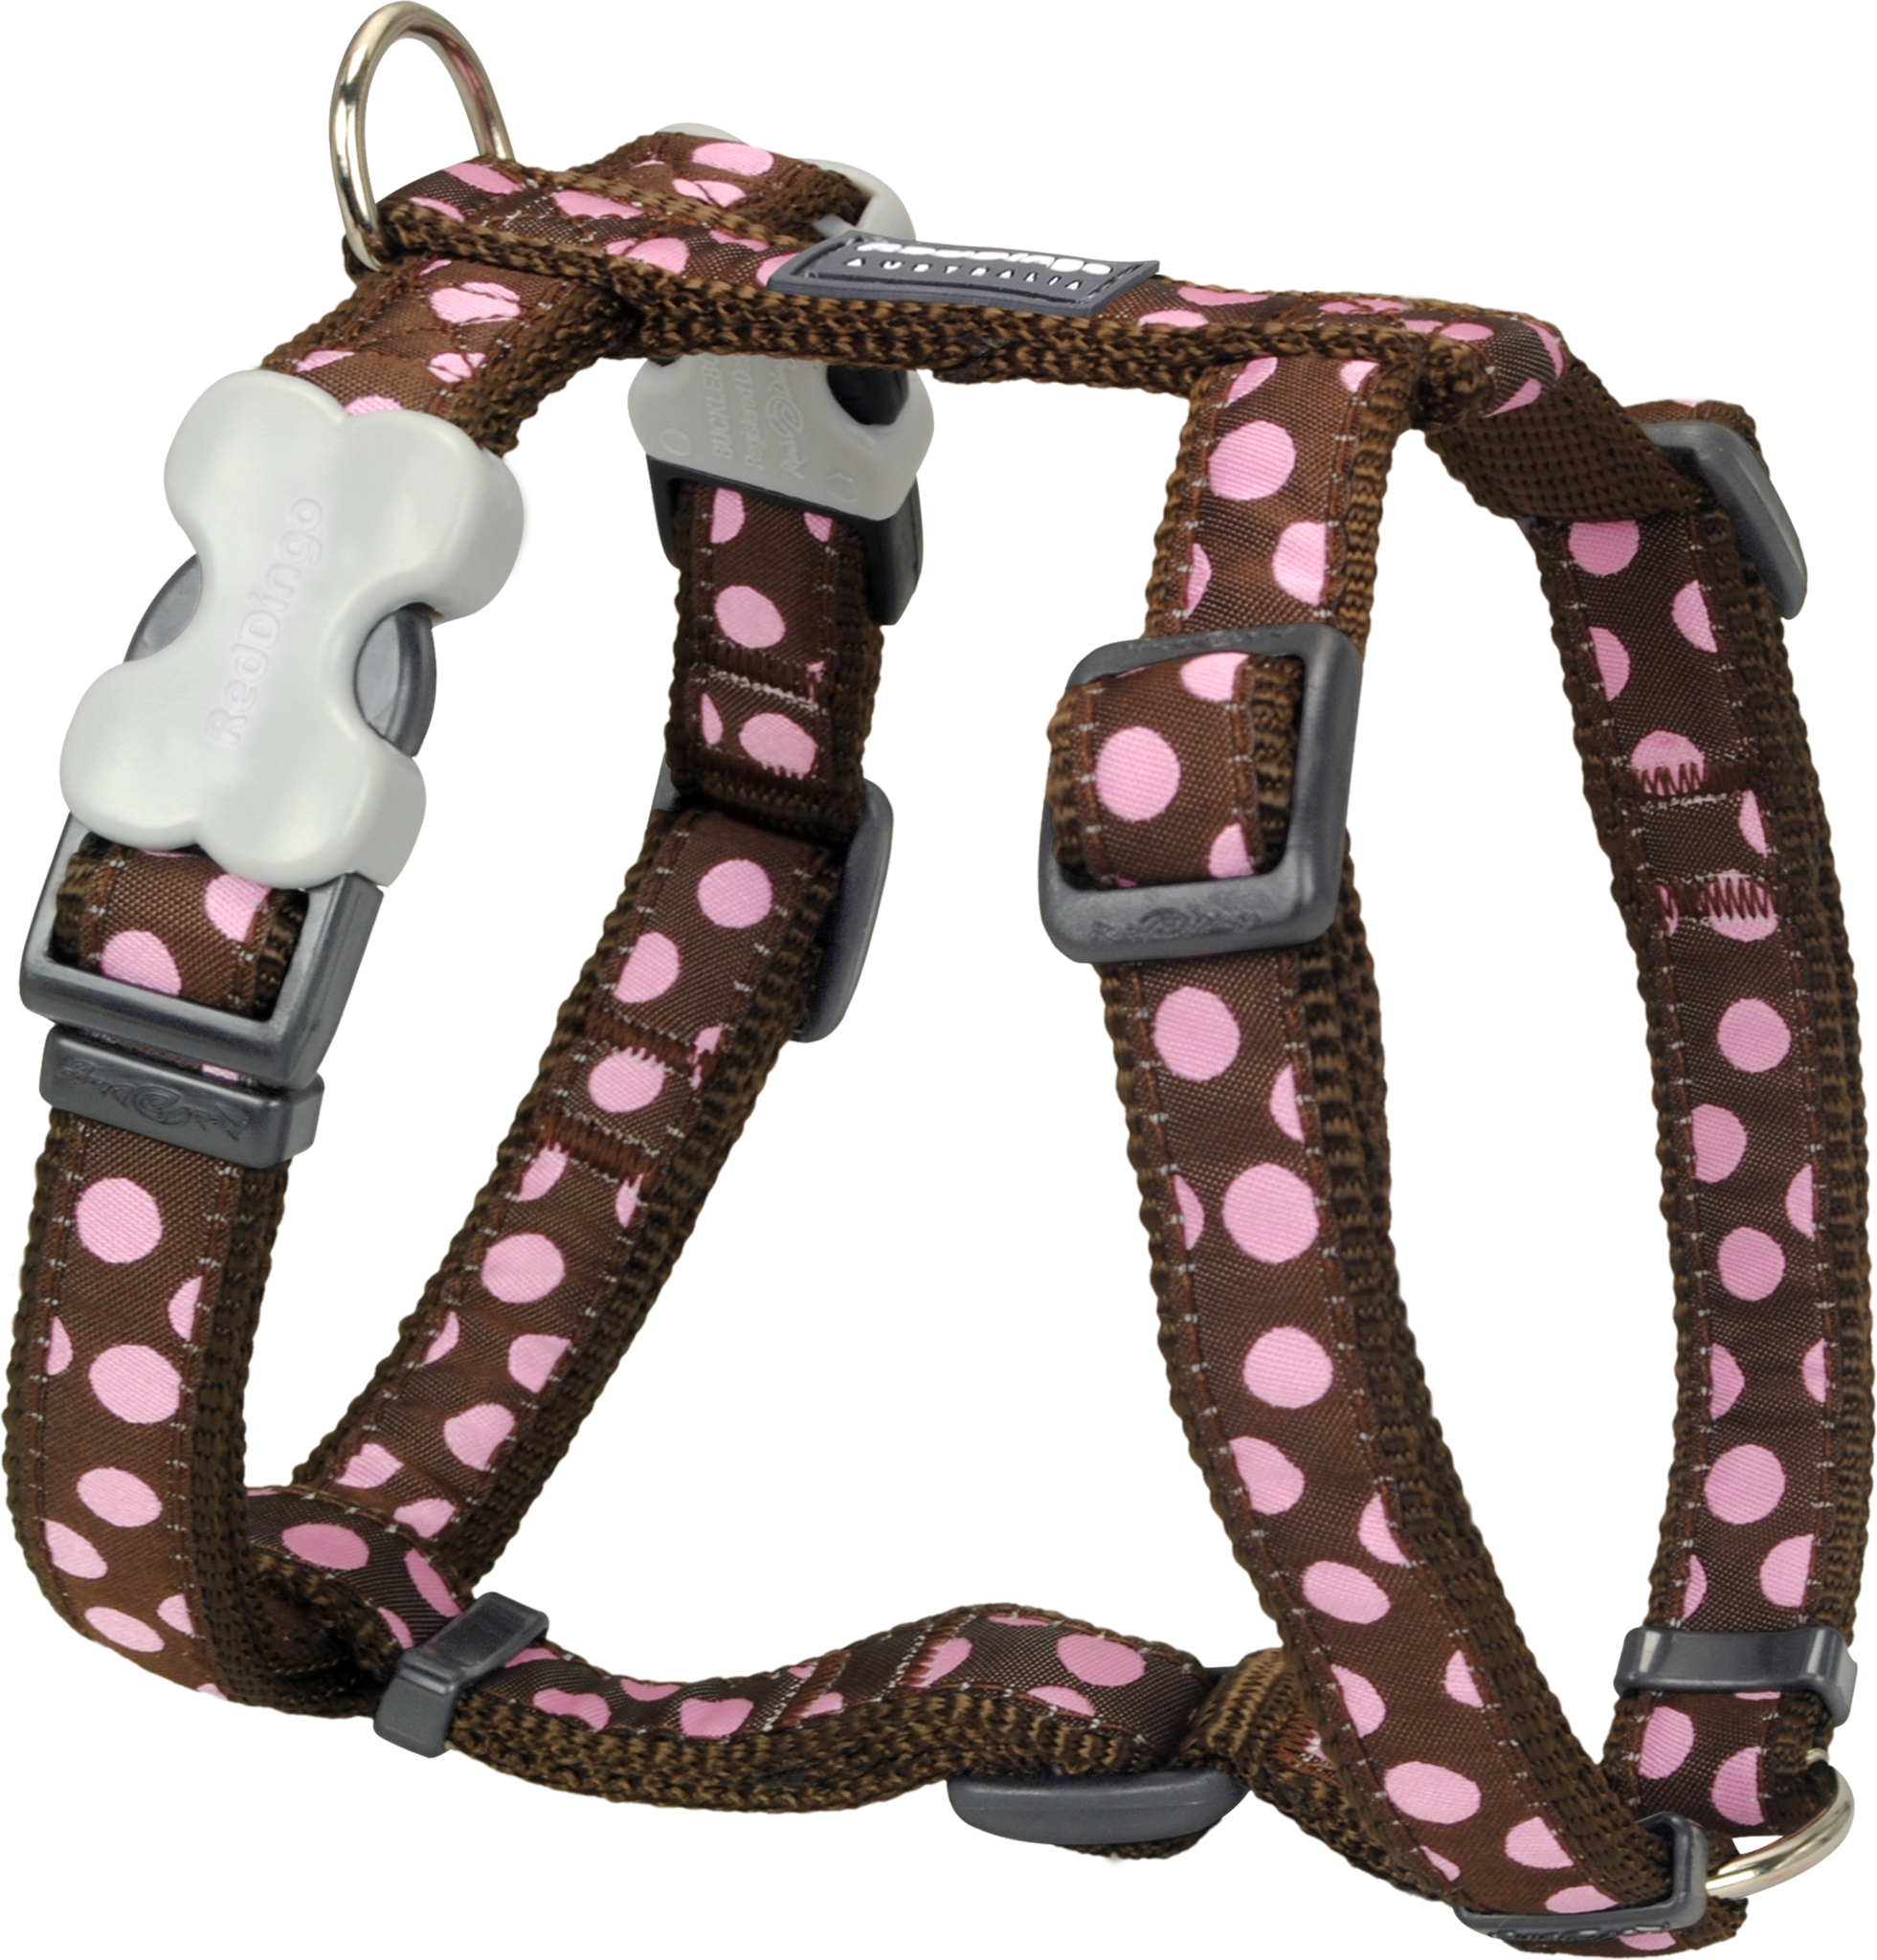 Red Dingo Dog Harness Design Pink Dots on Brown, Small